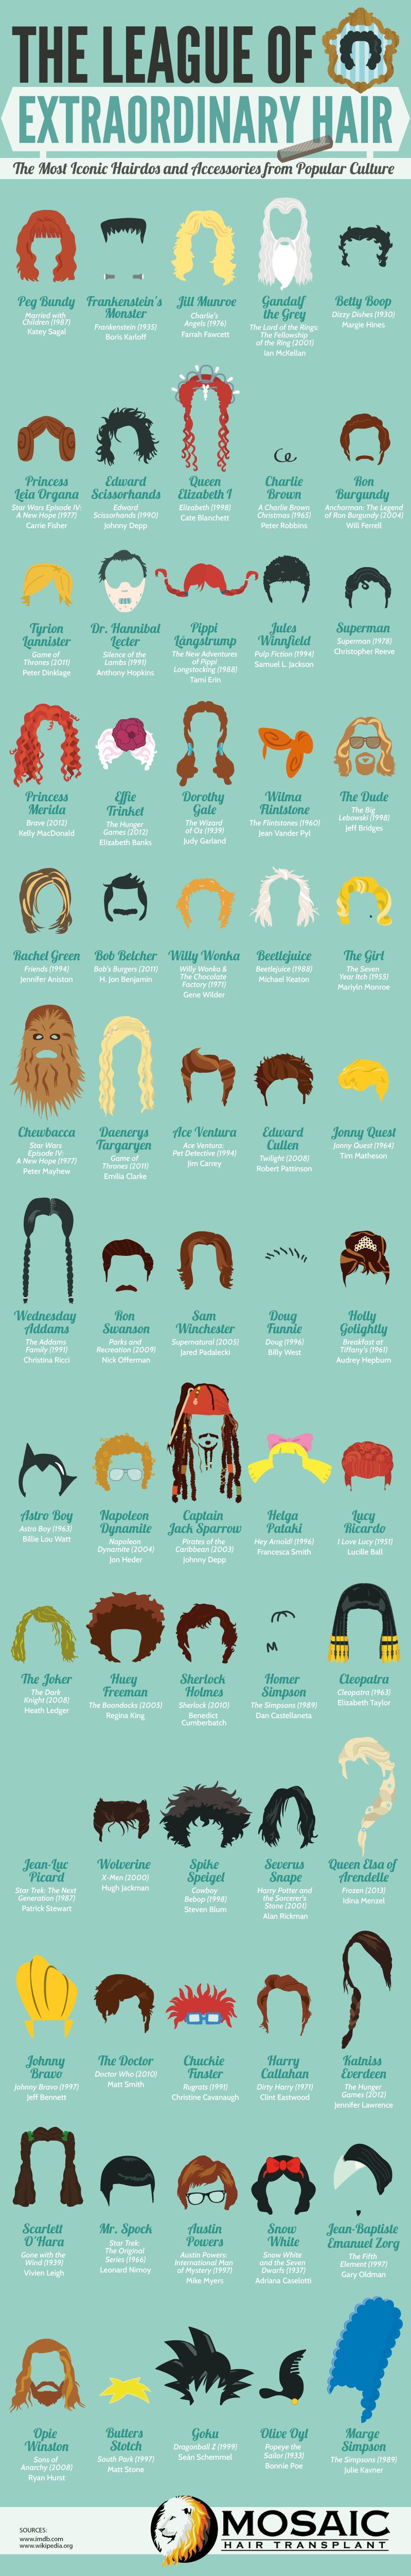 Iconic hairstyles of famous characters from pop culture